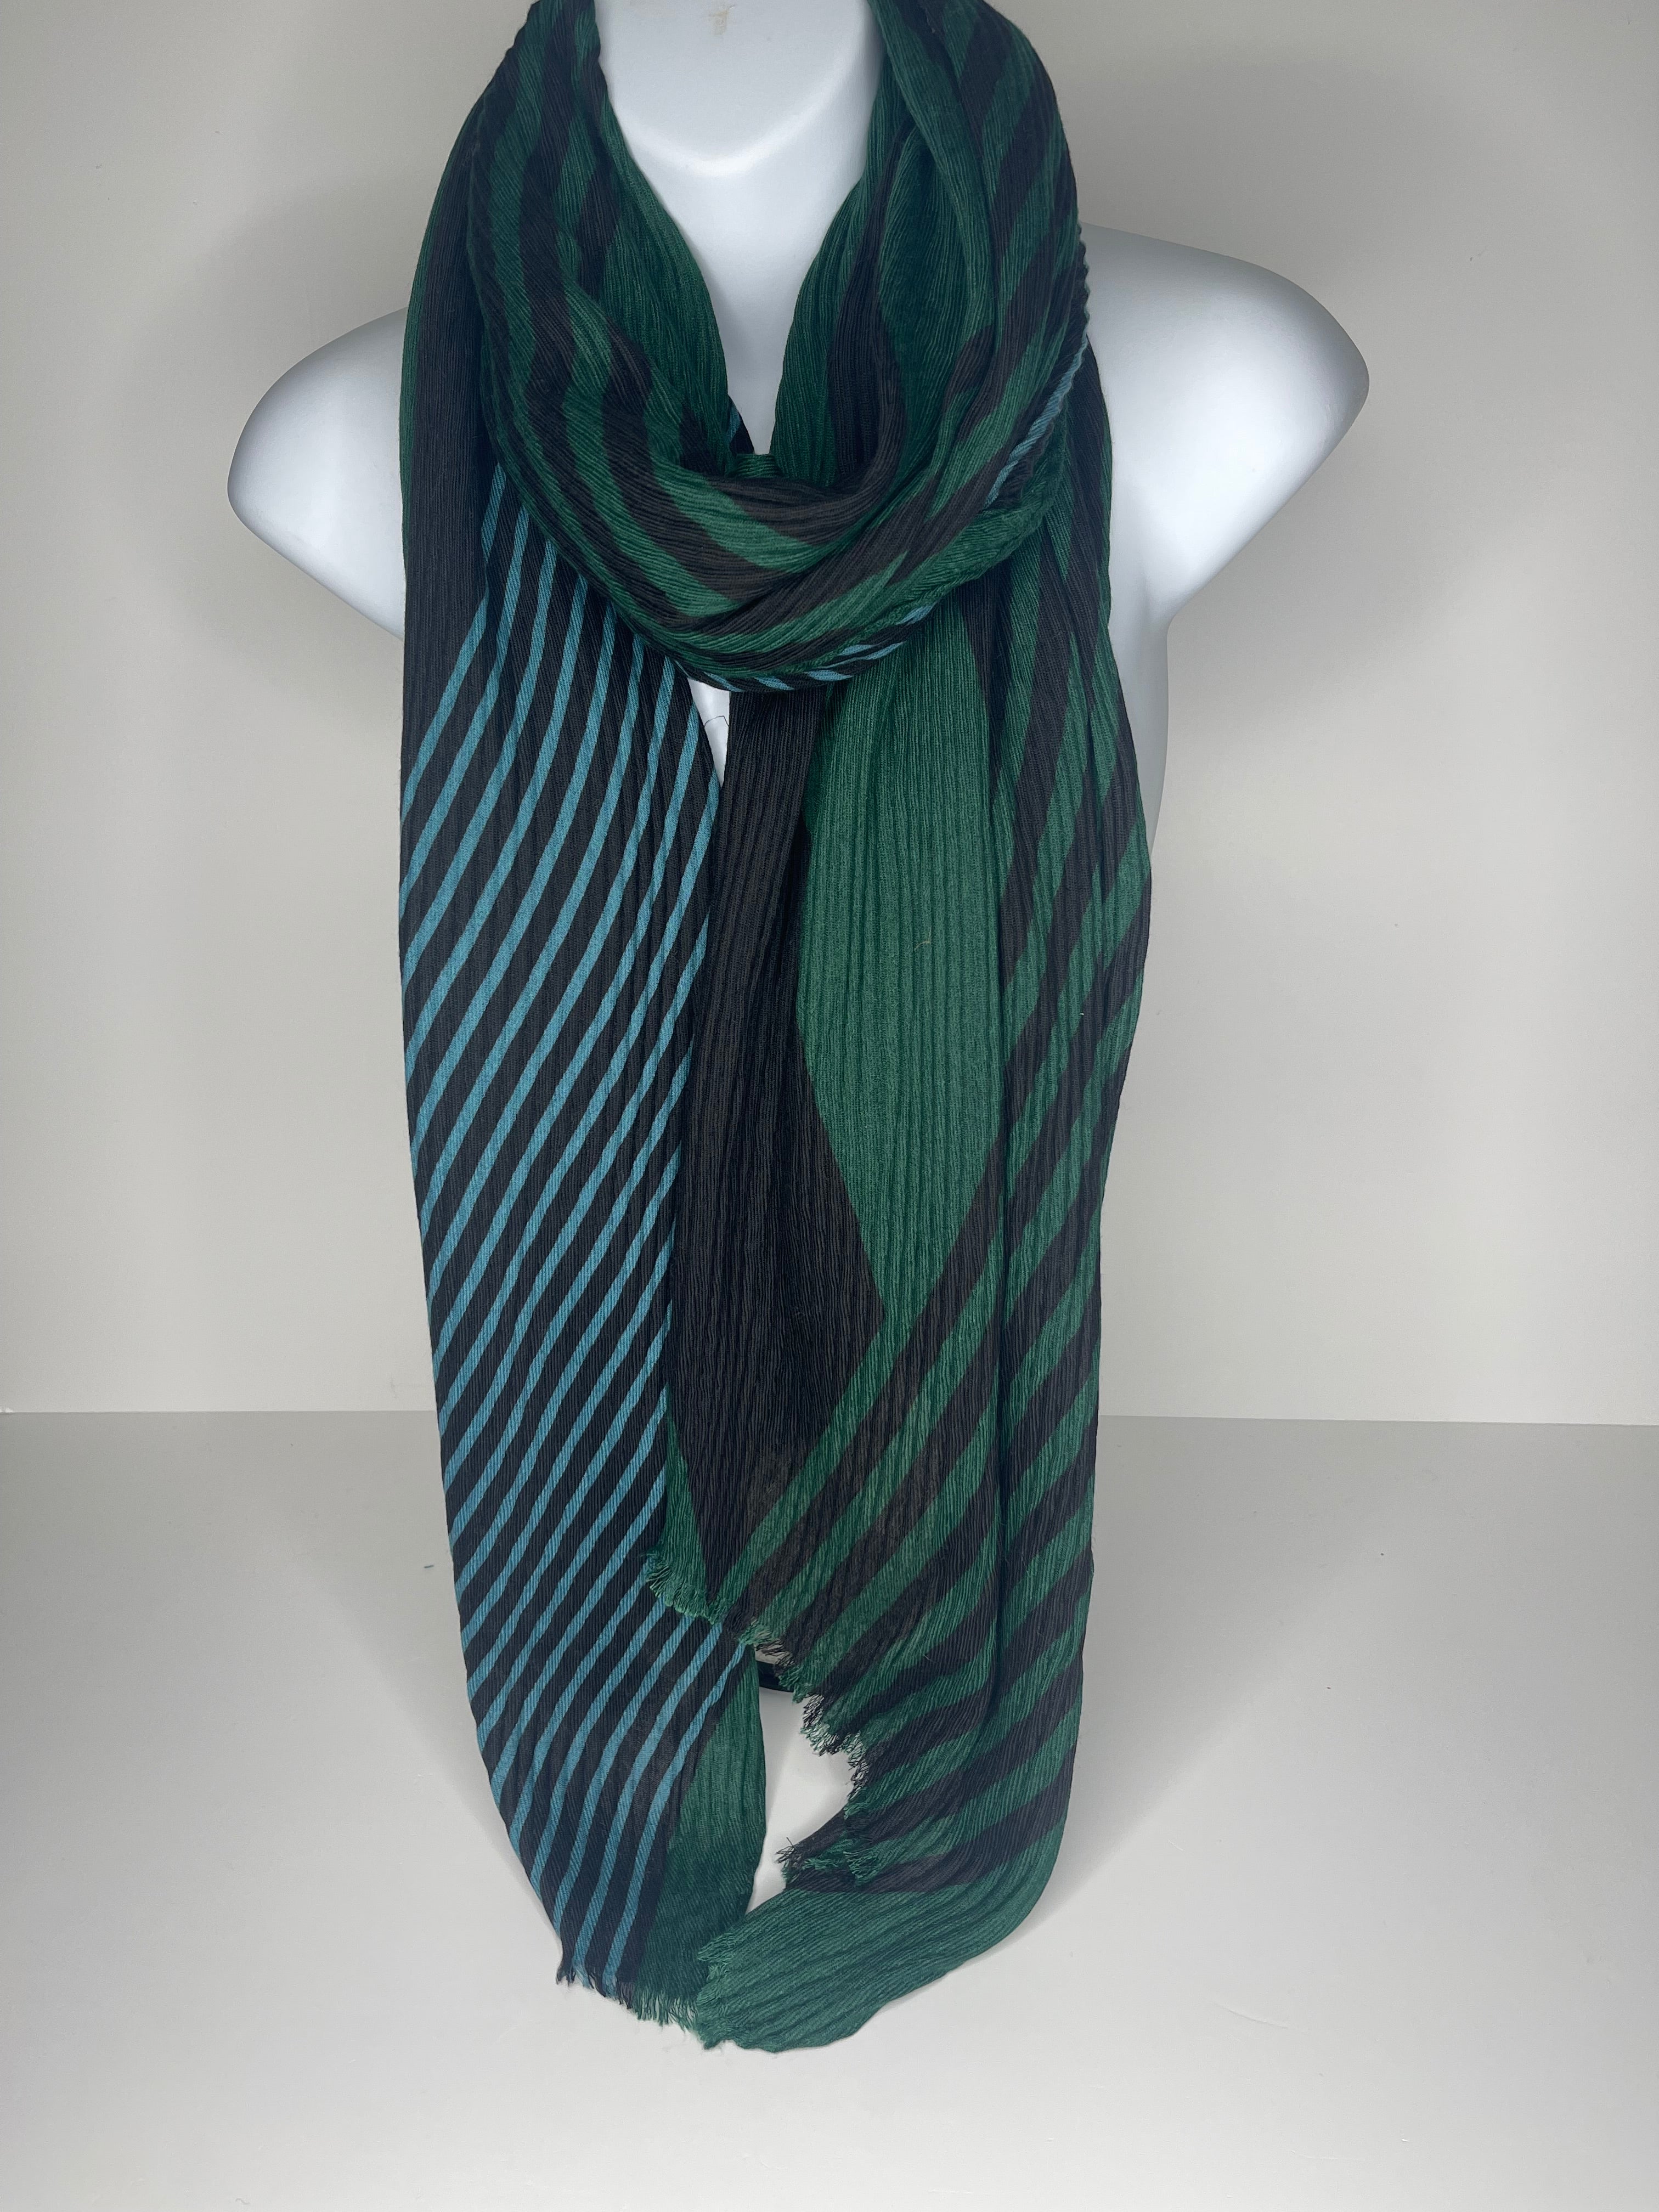 Lighter weight pleated abstract print scarf in shades of green, black and denim blue